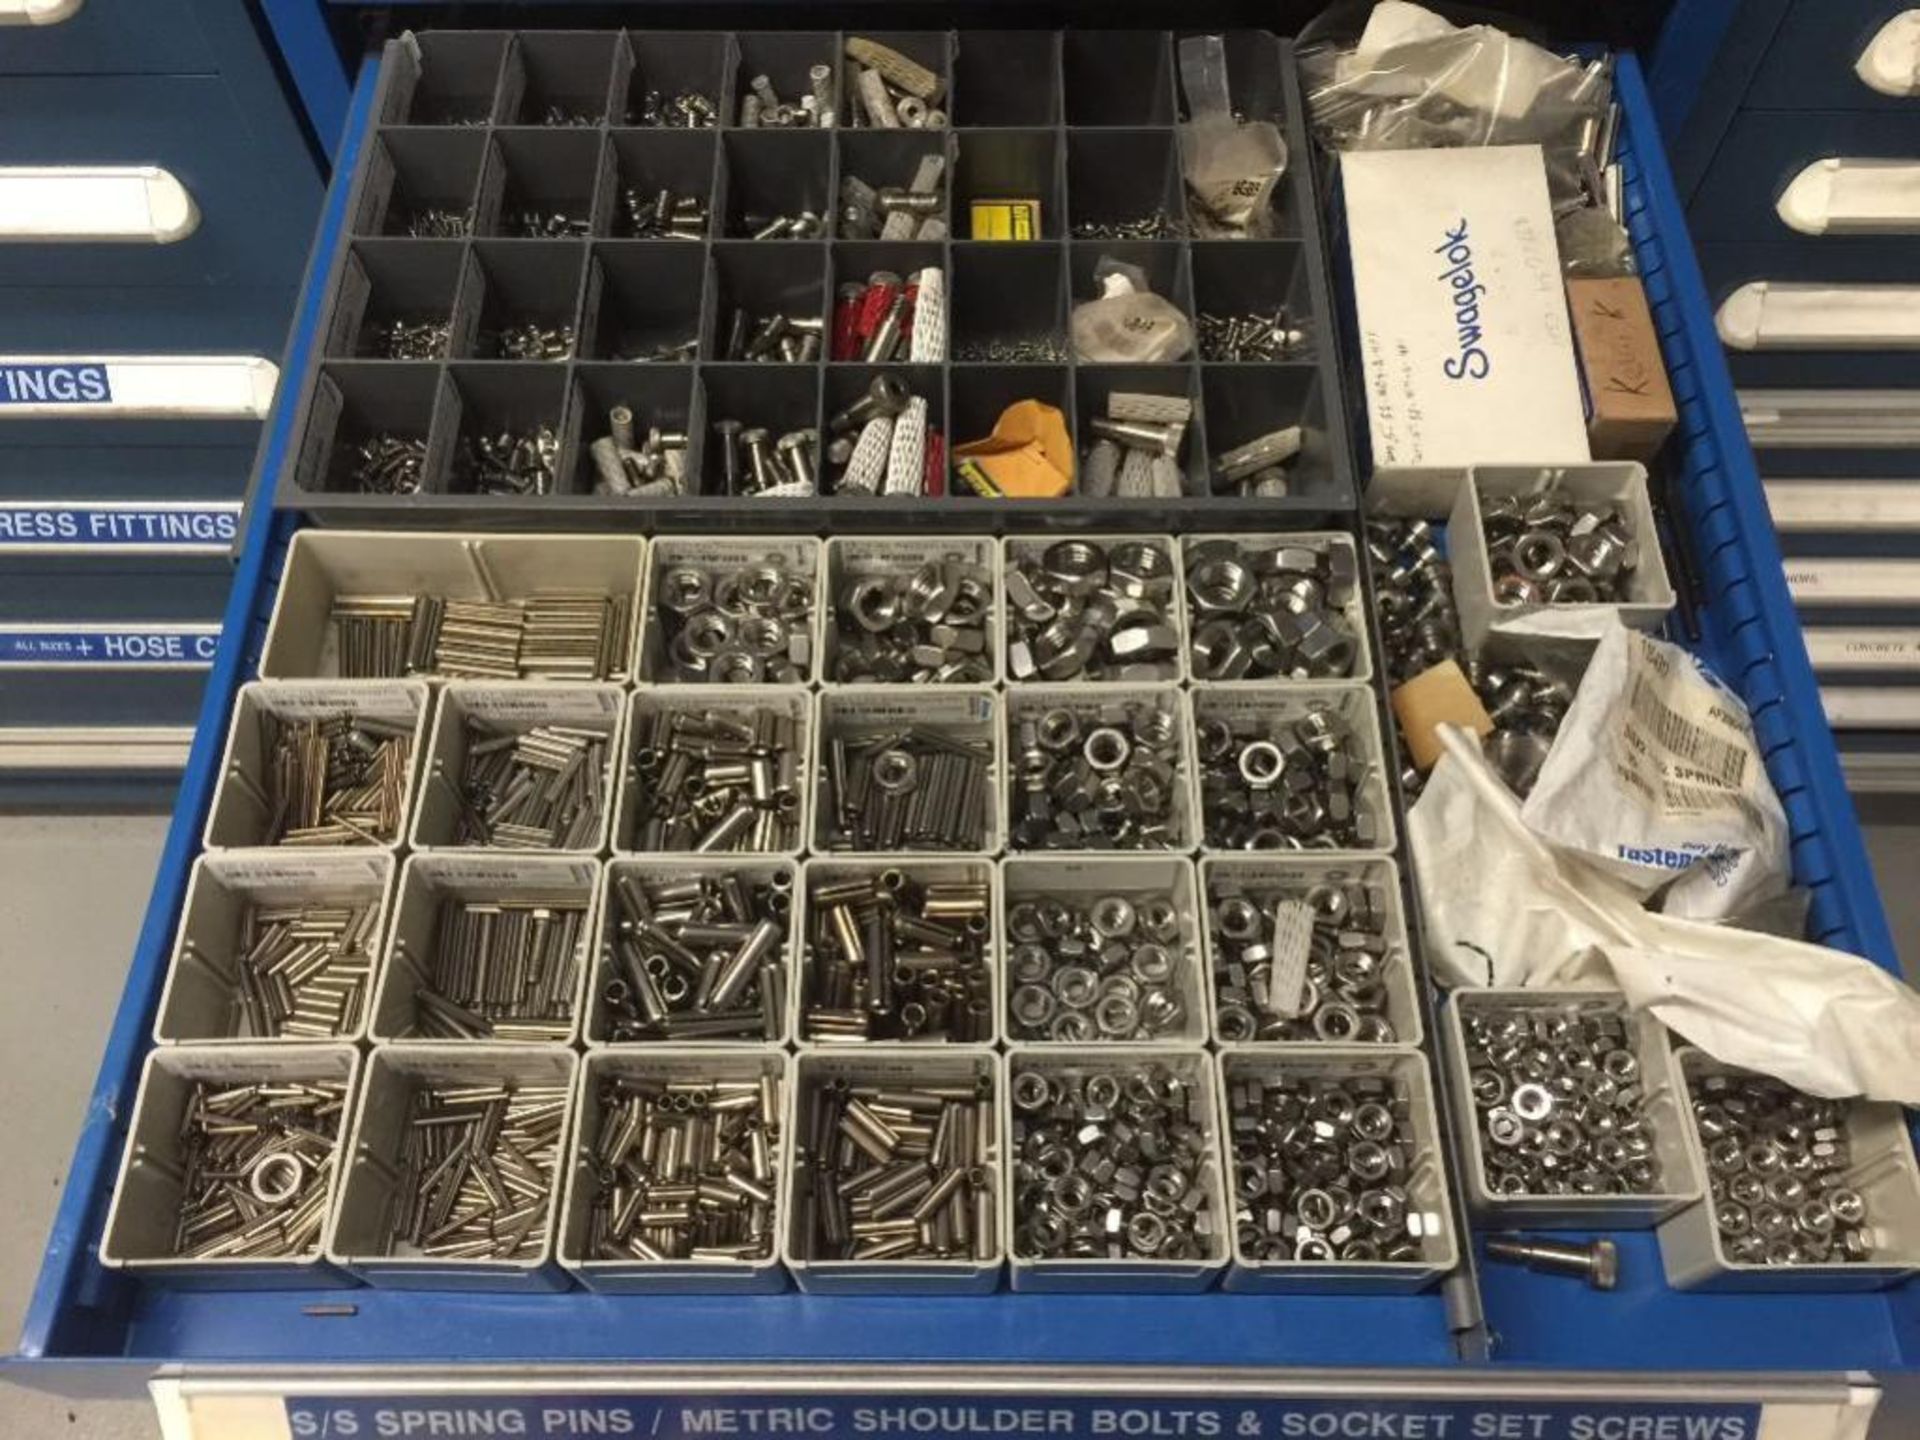 Contents only of drawer; cable ties, bulk head fittings, electrical connects, key stalk, SS spring p - Image 7 of 12